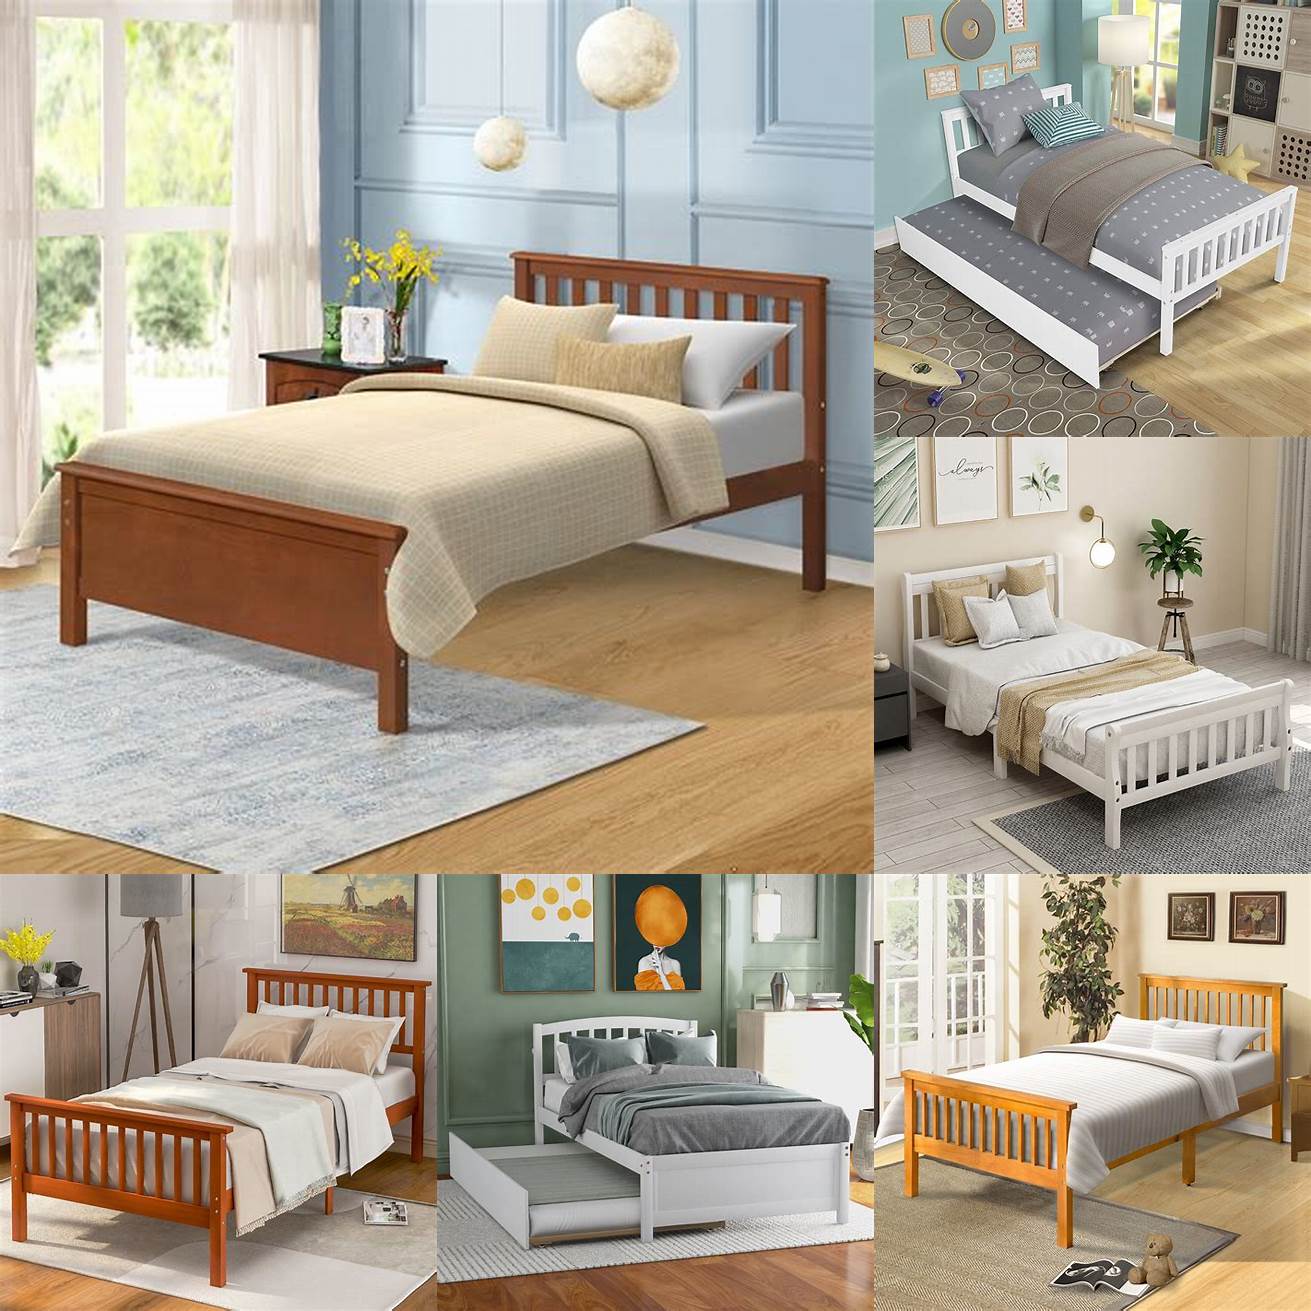 A Wood Twin Bed Frame with a headboard